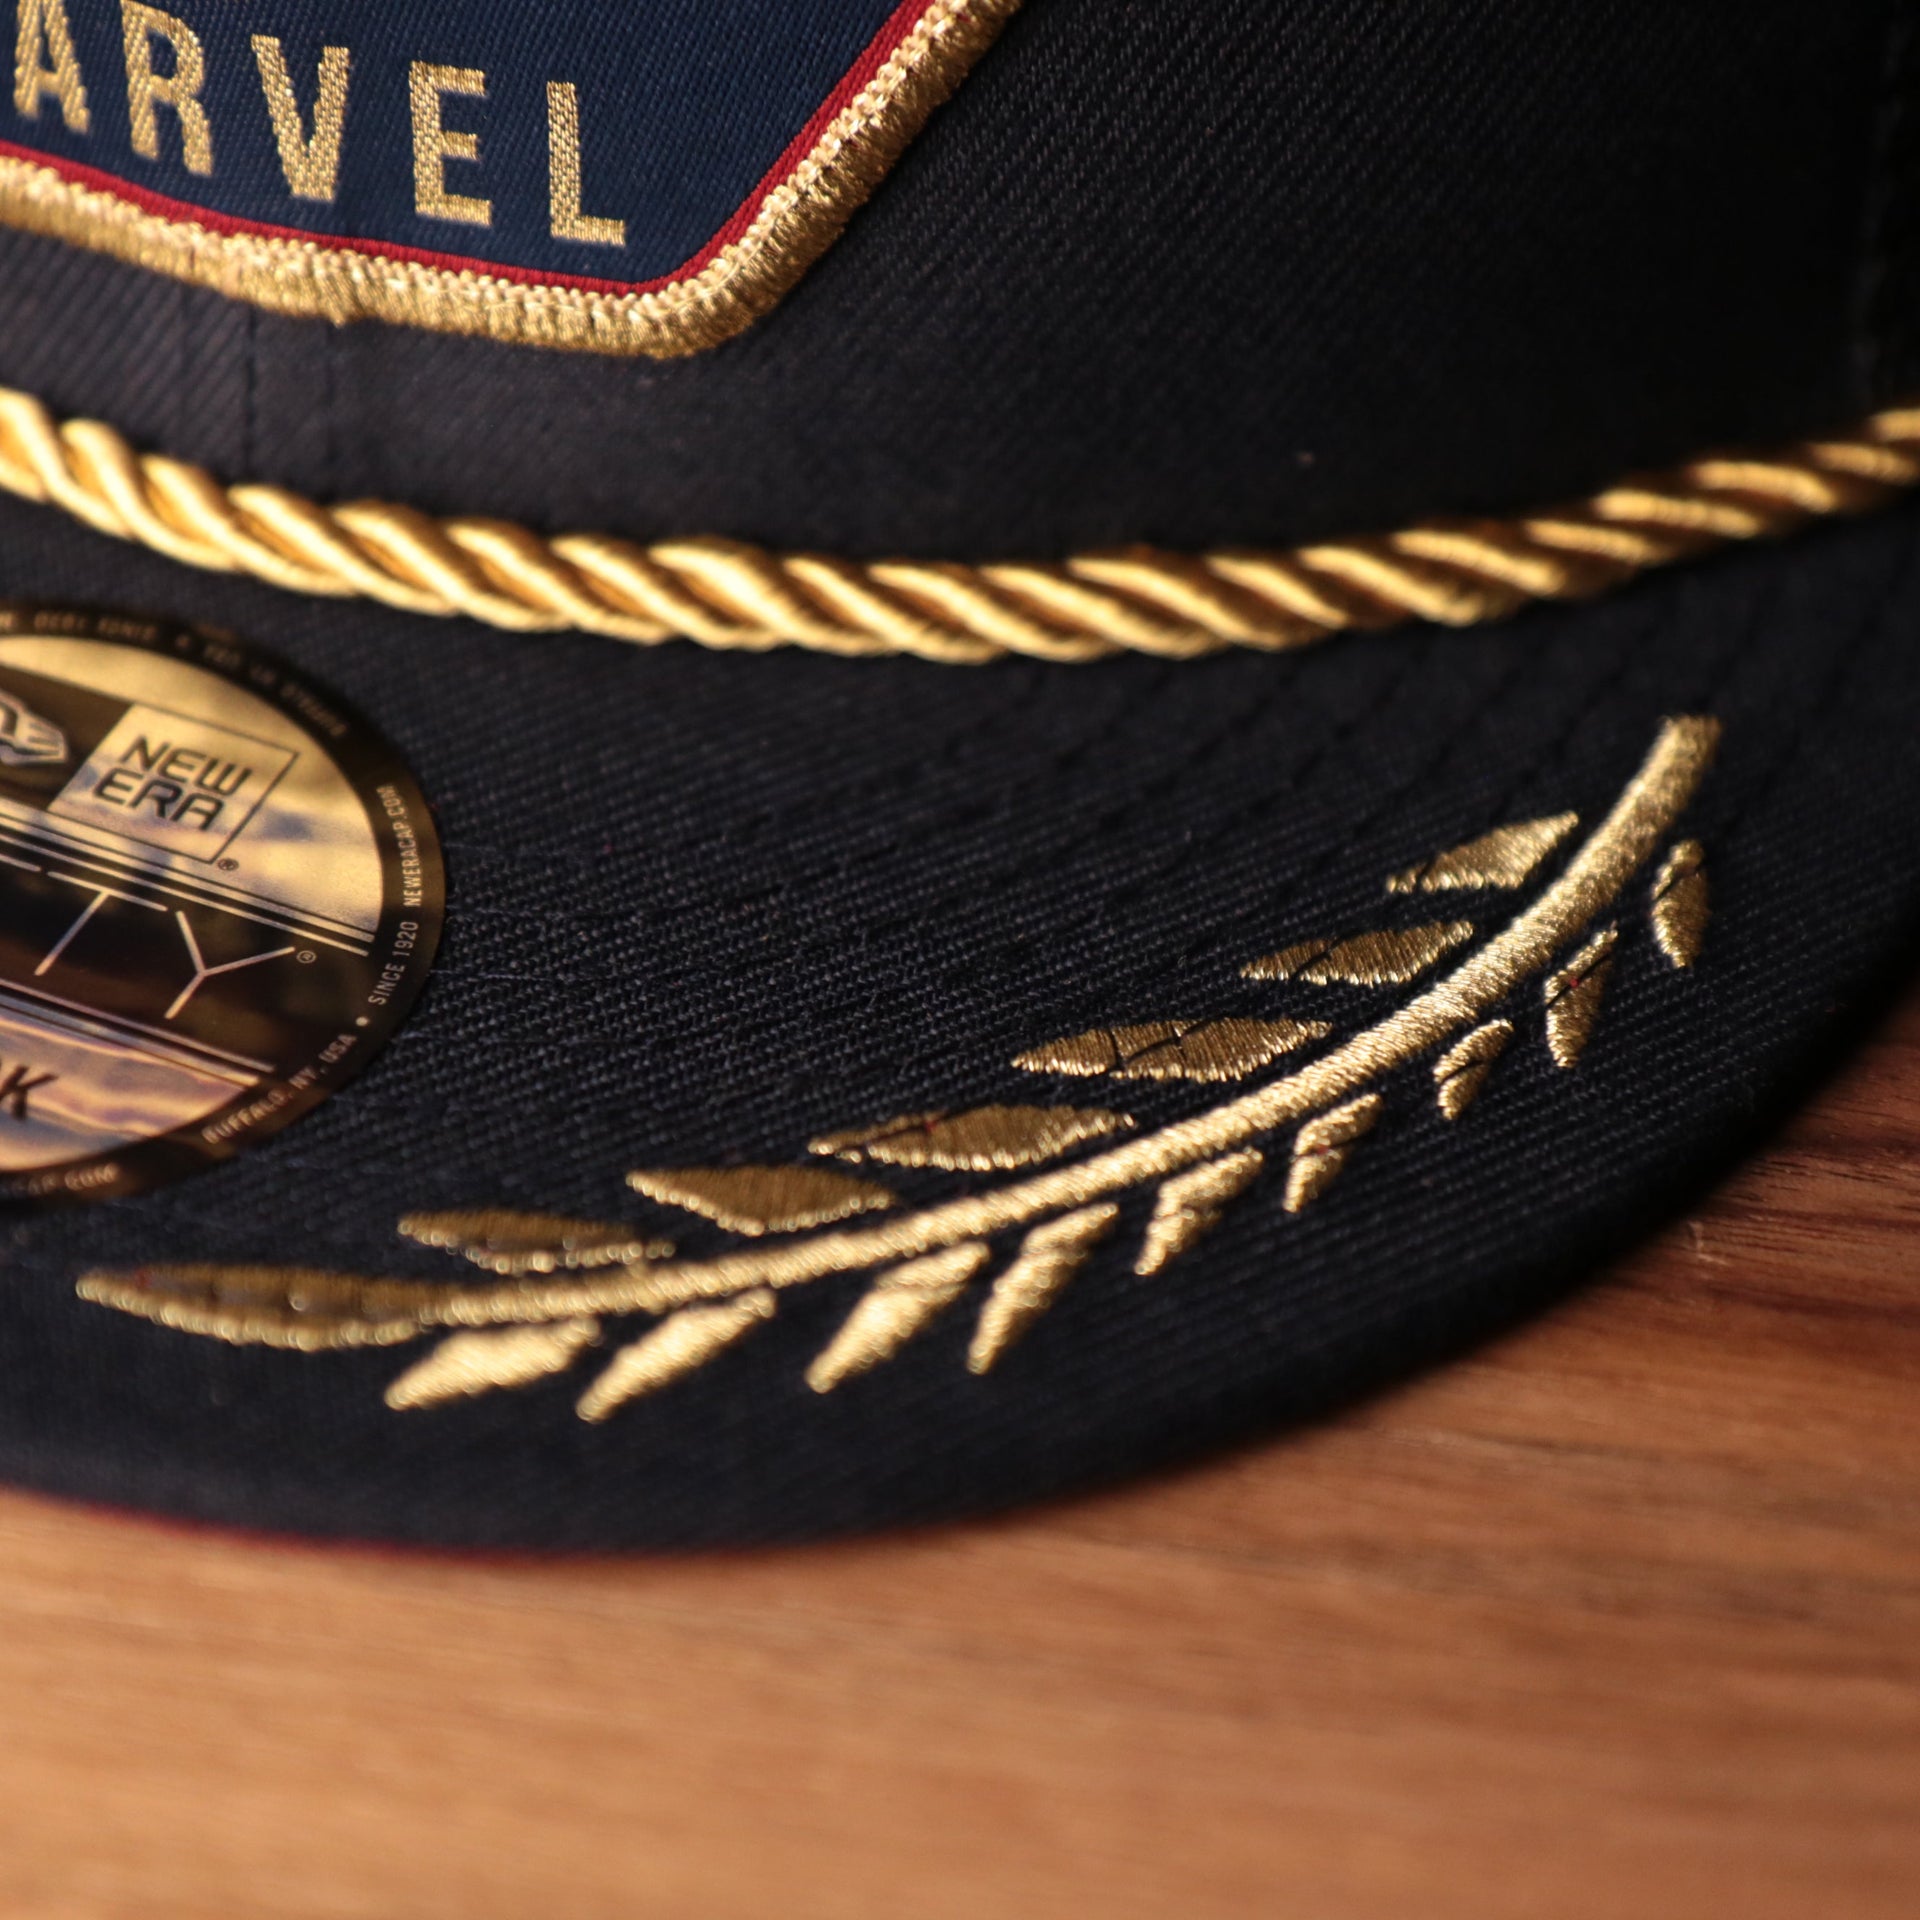 Captain Marvel Red Bottom Snapback | Captain Marvel Navy Trucker Red Bottom Snap Cap the brim of this cap is navy with gold designs on it